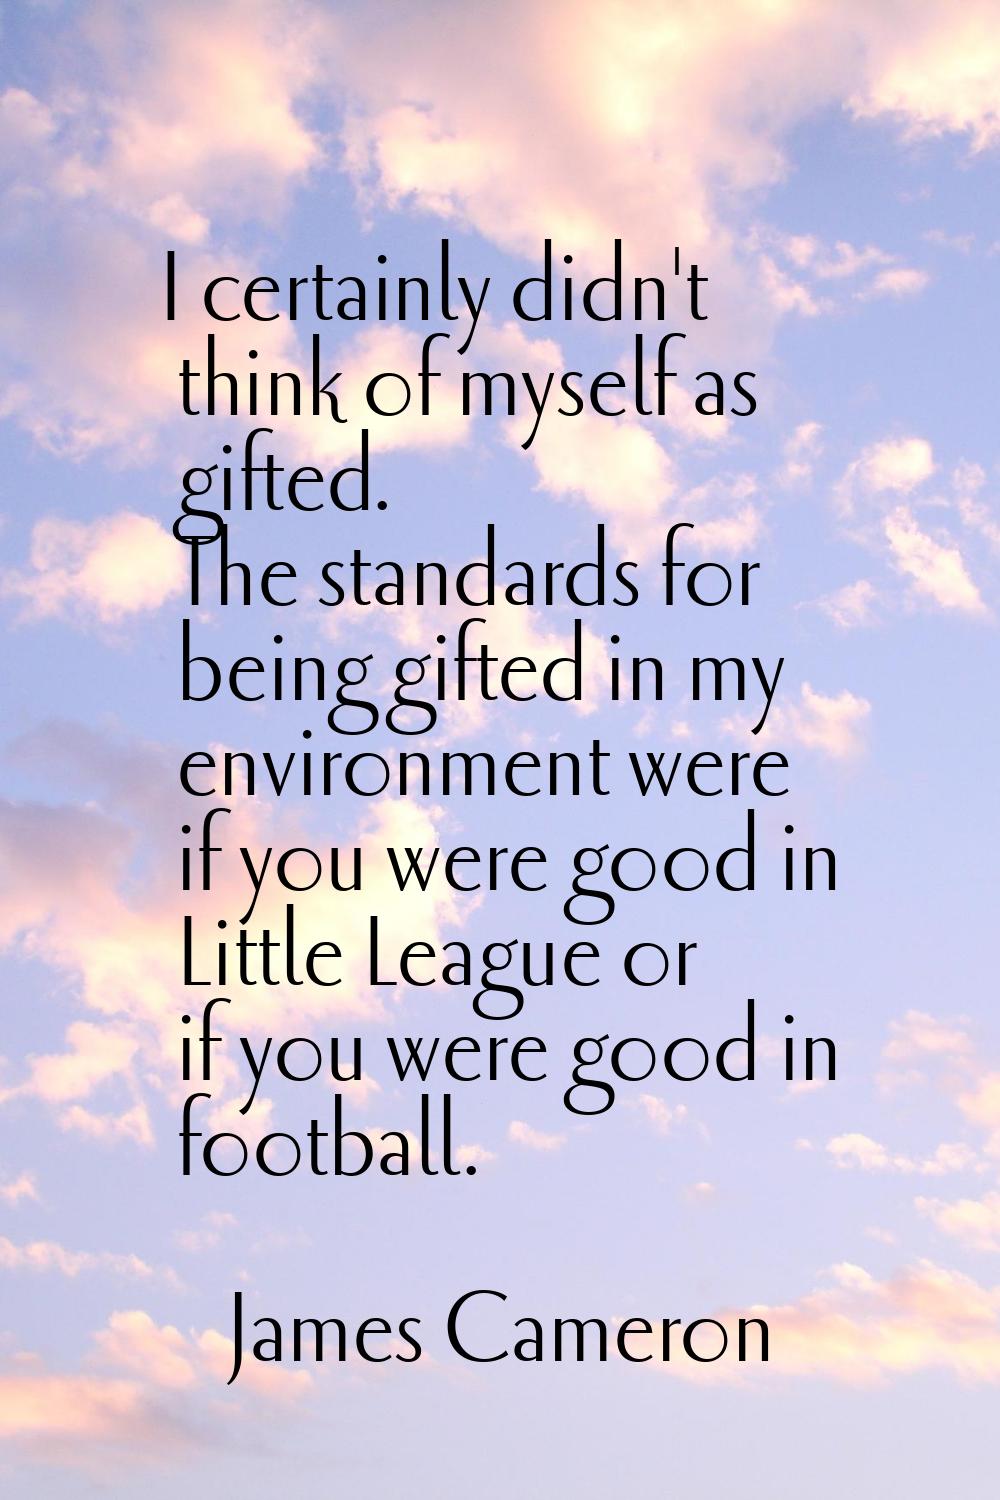 I certainly didn't think of myself as gifted. The standards for being gifted in my environment were